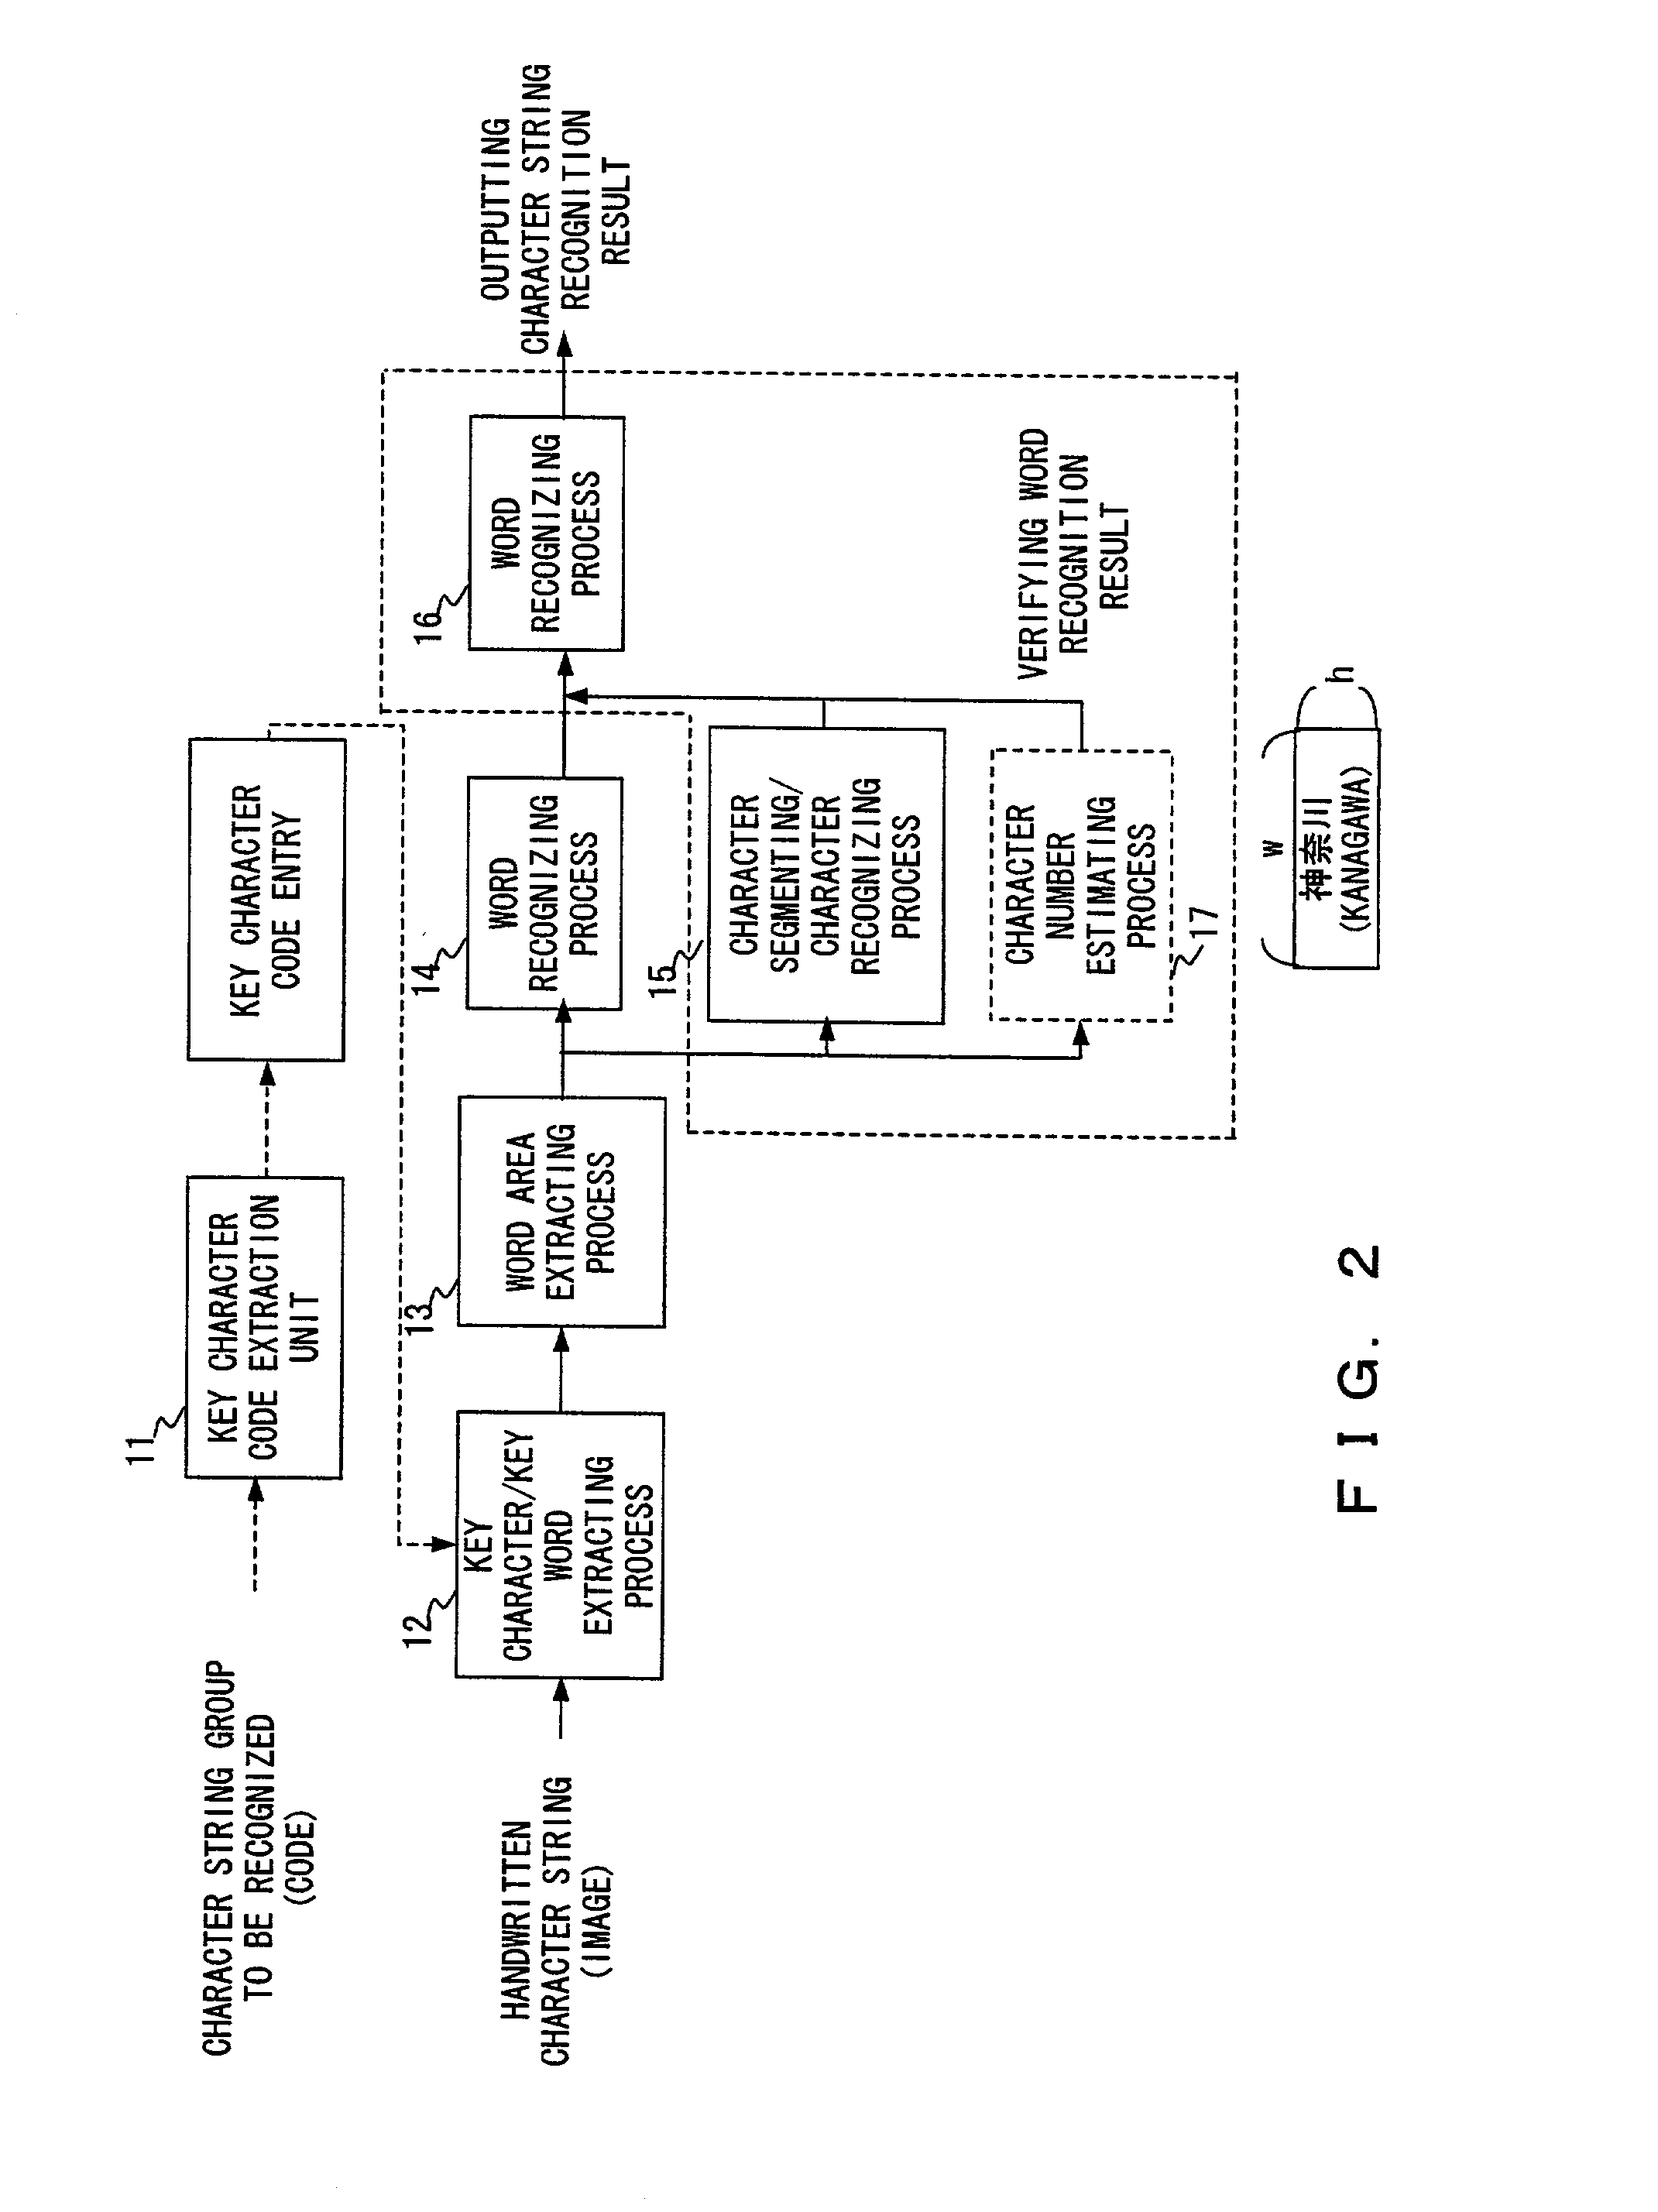 Character string recognition apparatus, character string recognizing method, and storage medium therefor